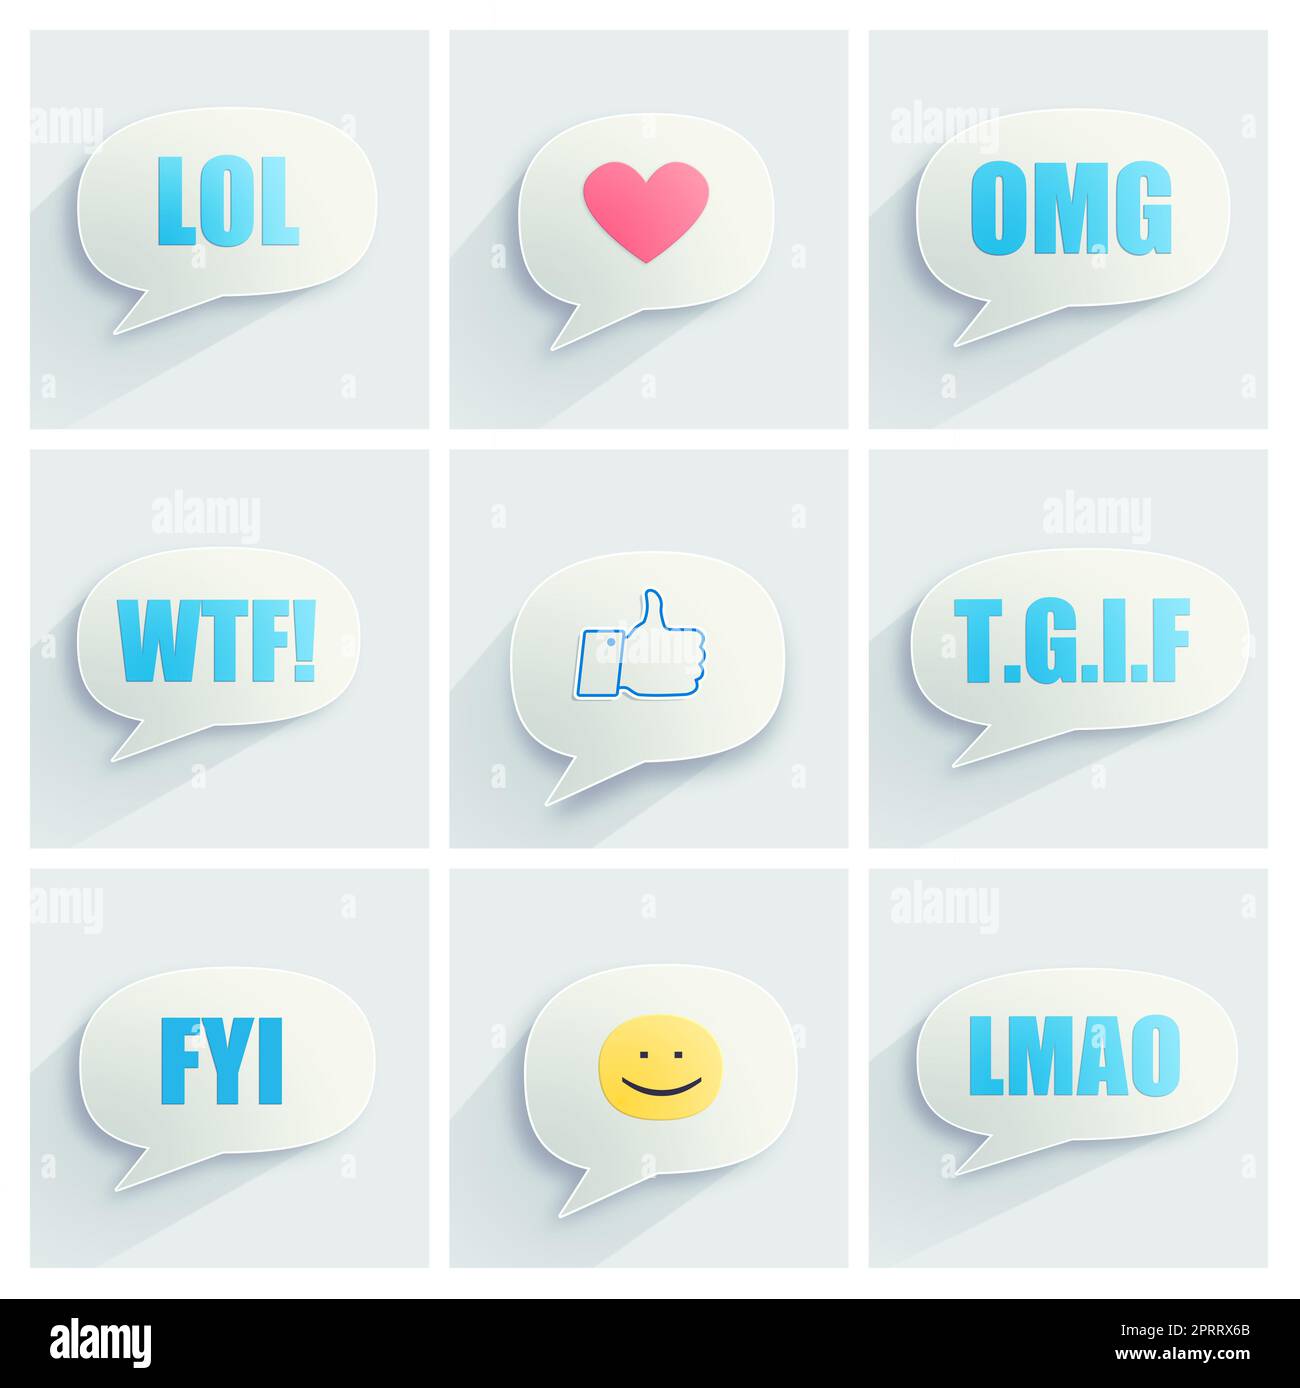 English Slang - Text messaging: LOL WTF BRB and more! 